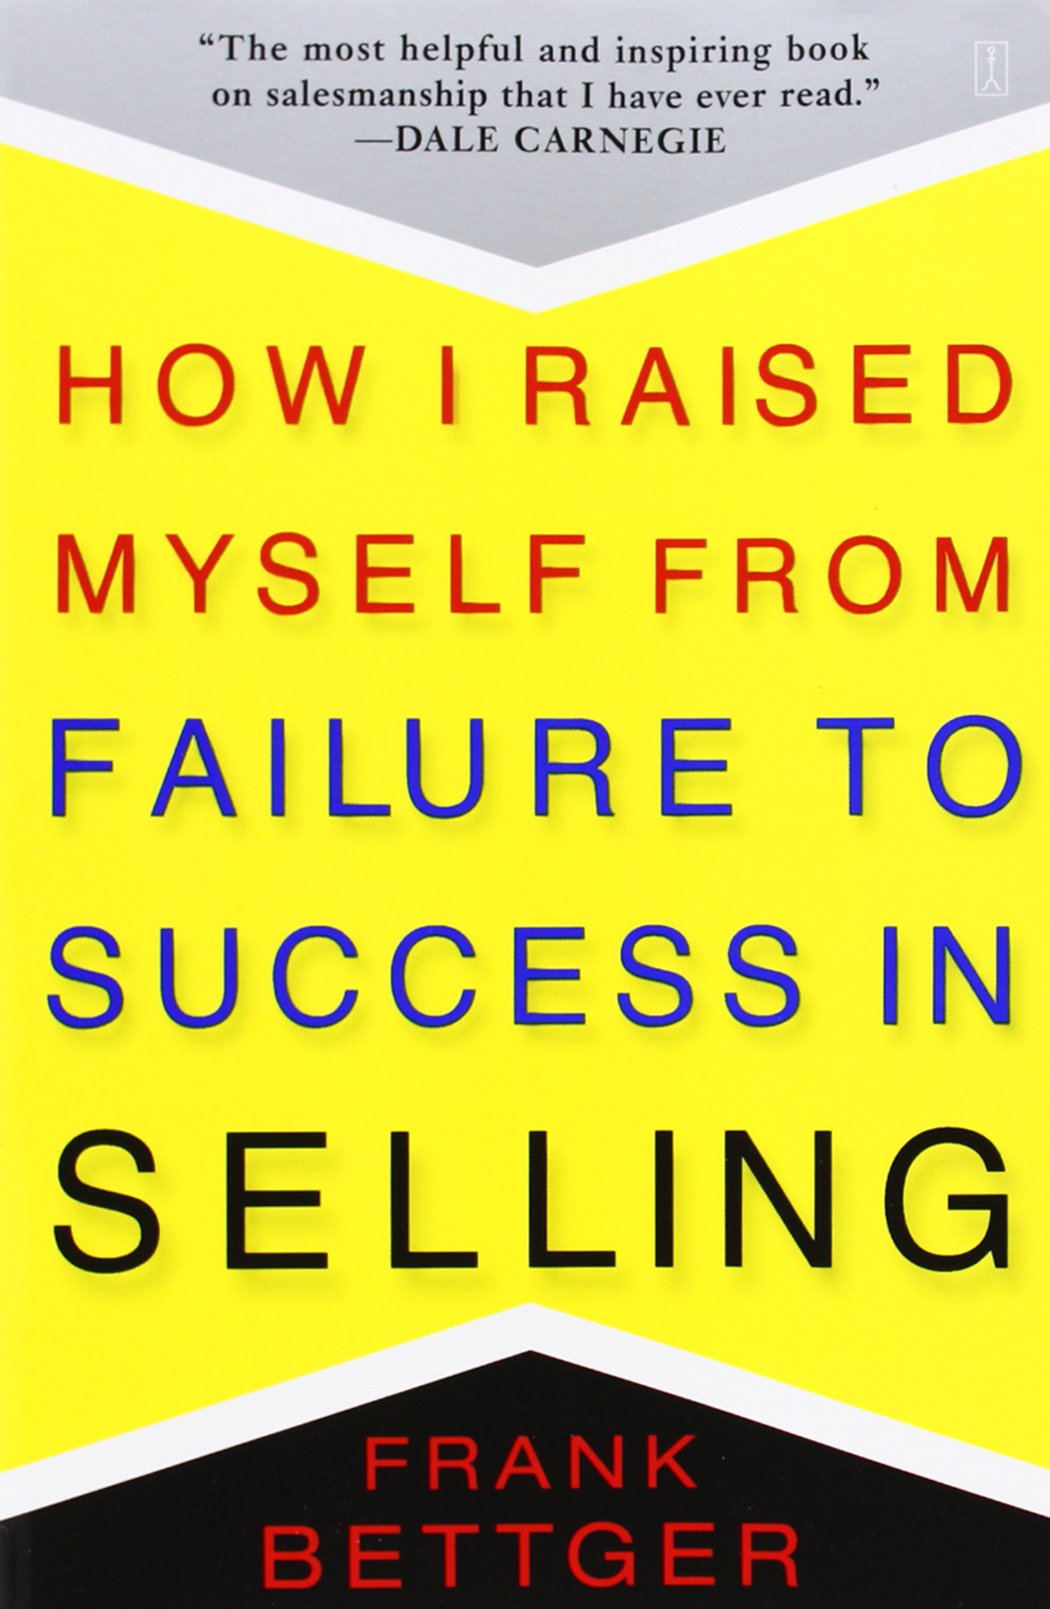 How I Raise Myself From Failure to Success by Frank Bettger